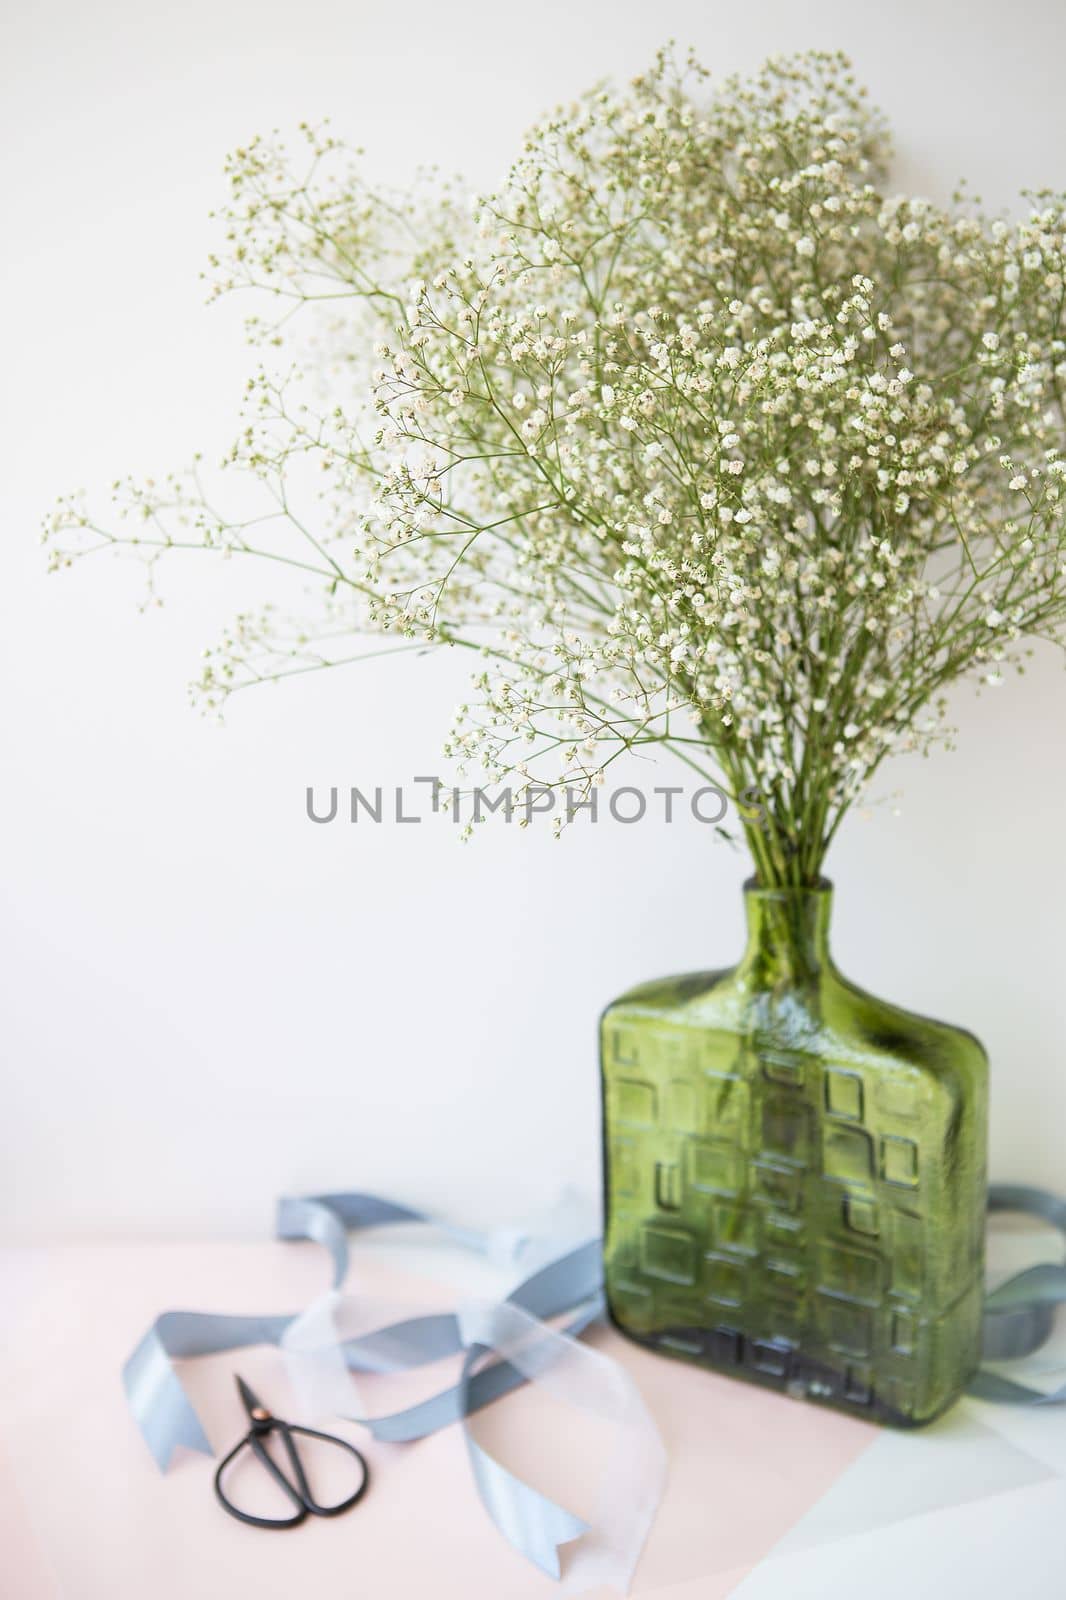 Preparing the bouquet for the wedding ceremony, a bouquet of white gypsophila flowers stands in a green vase along with ribbons and scissors. by sfinks